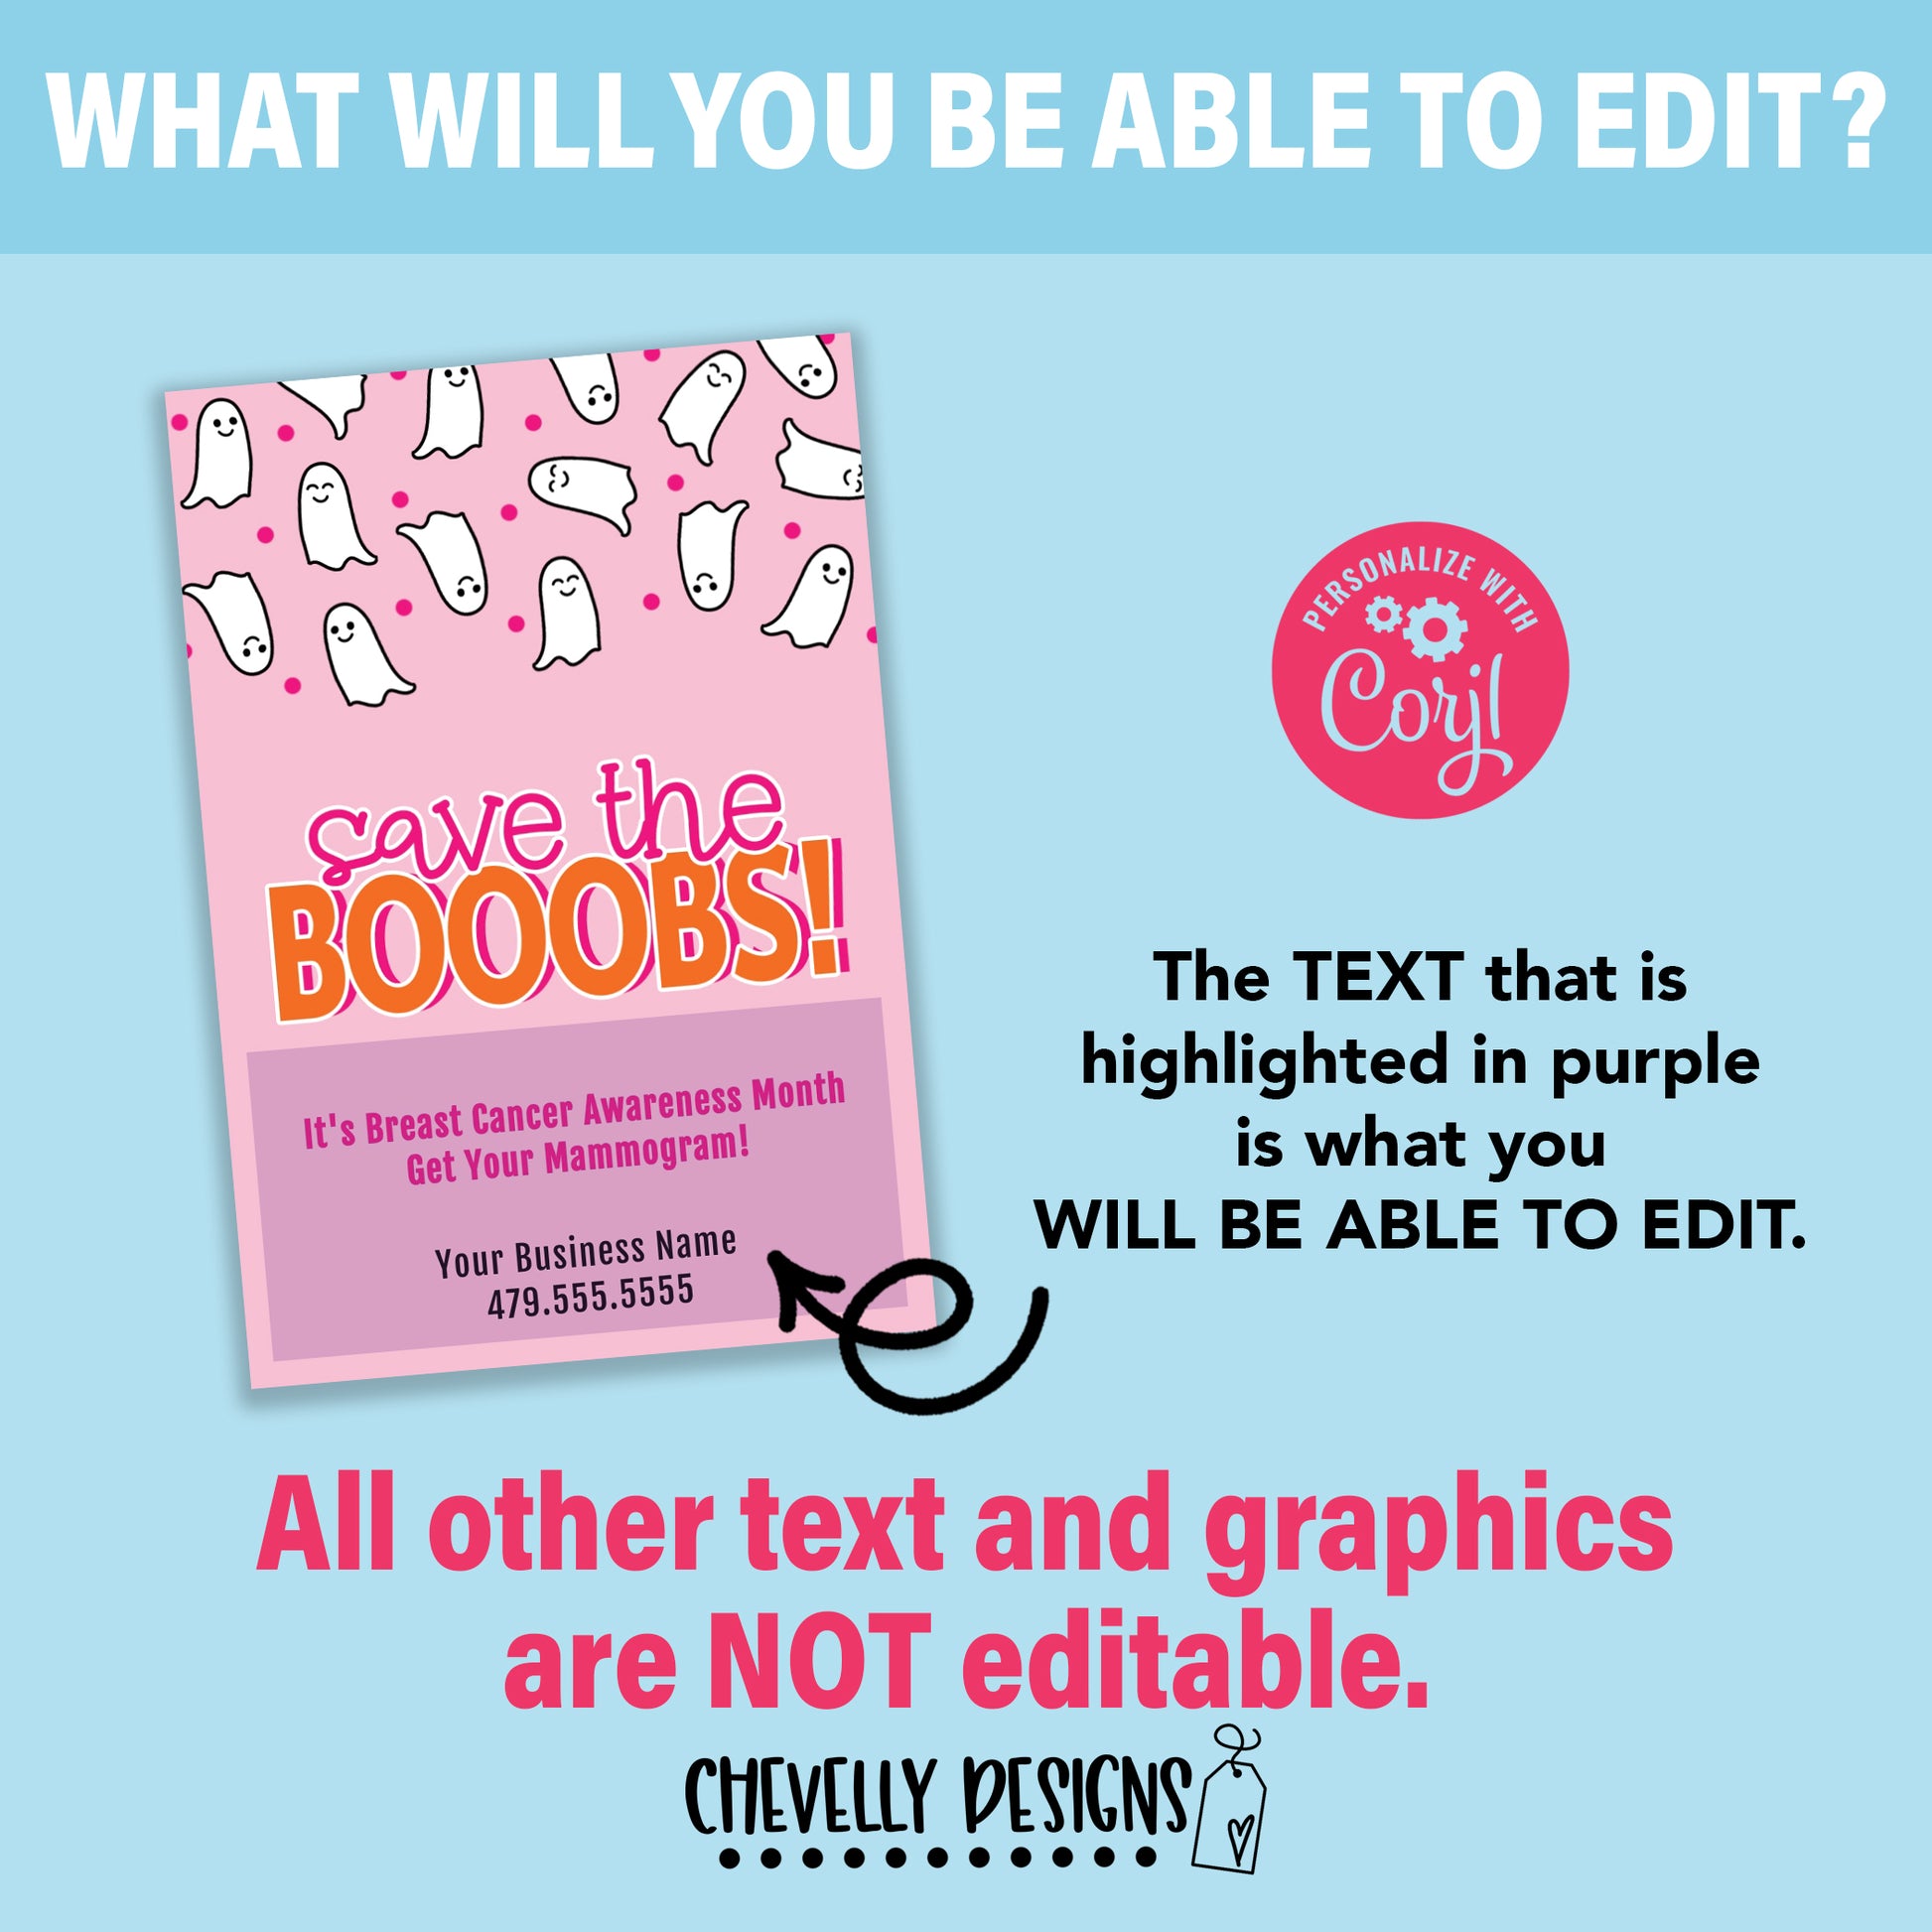 EDITABLE - Save The Booobs - Breast Cancer Awareness - Business